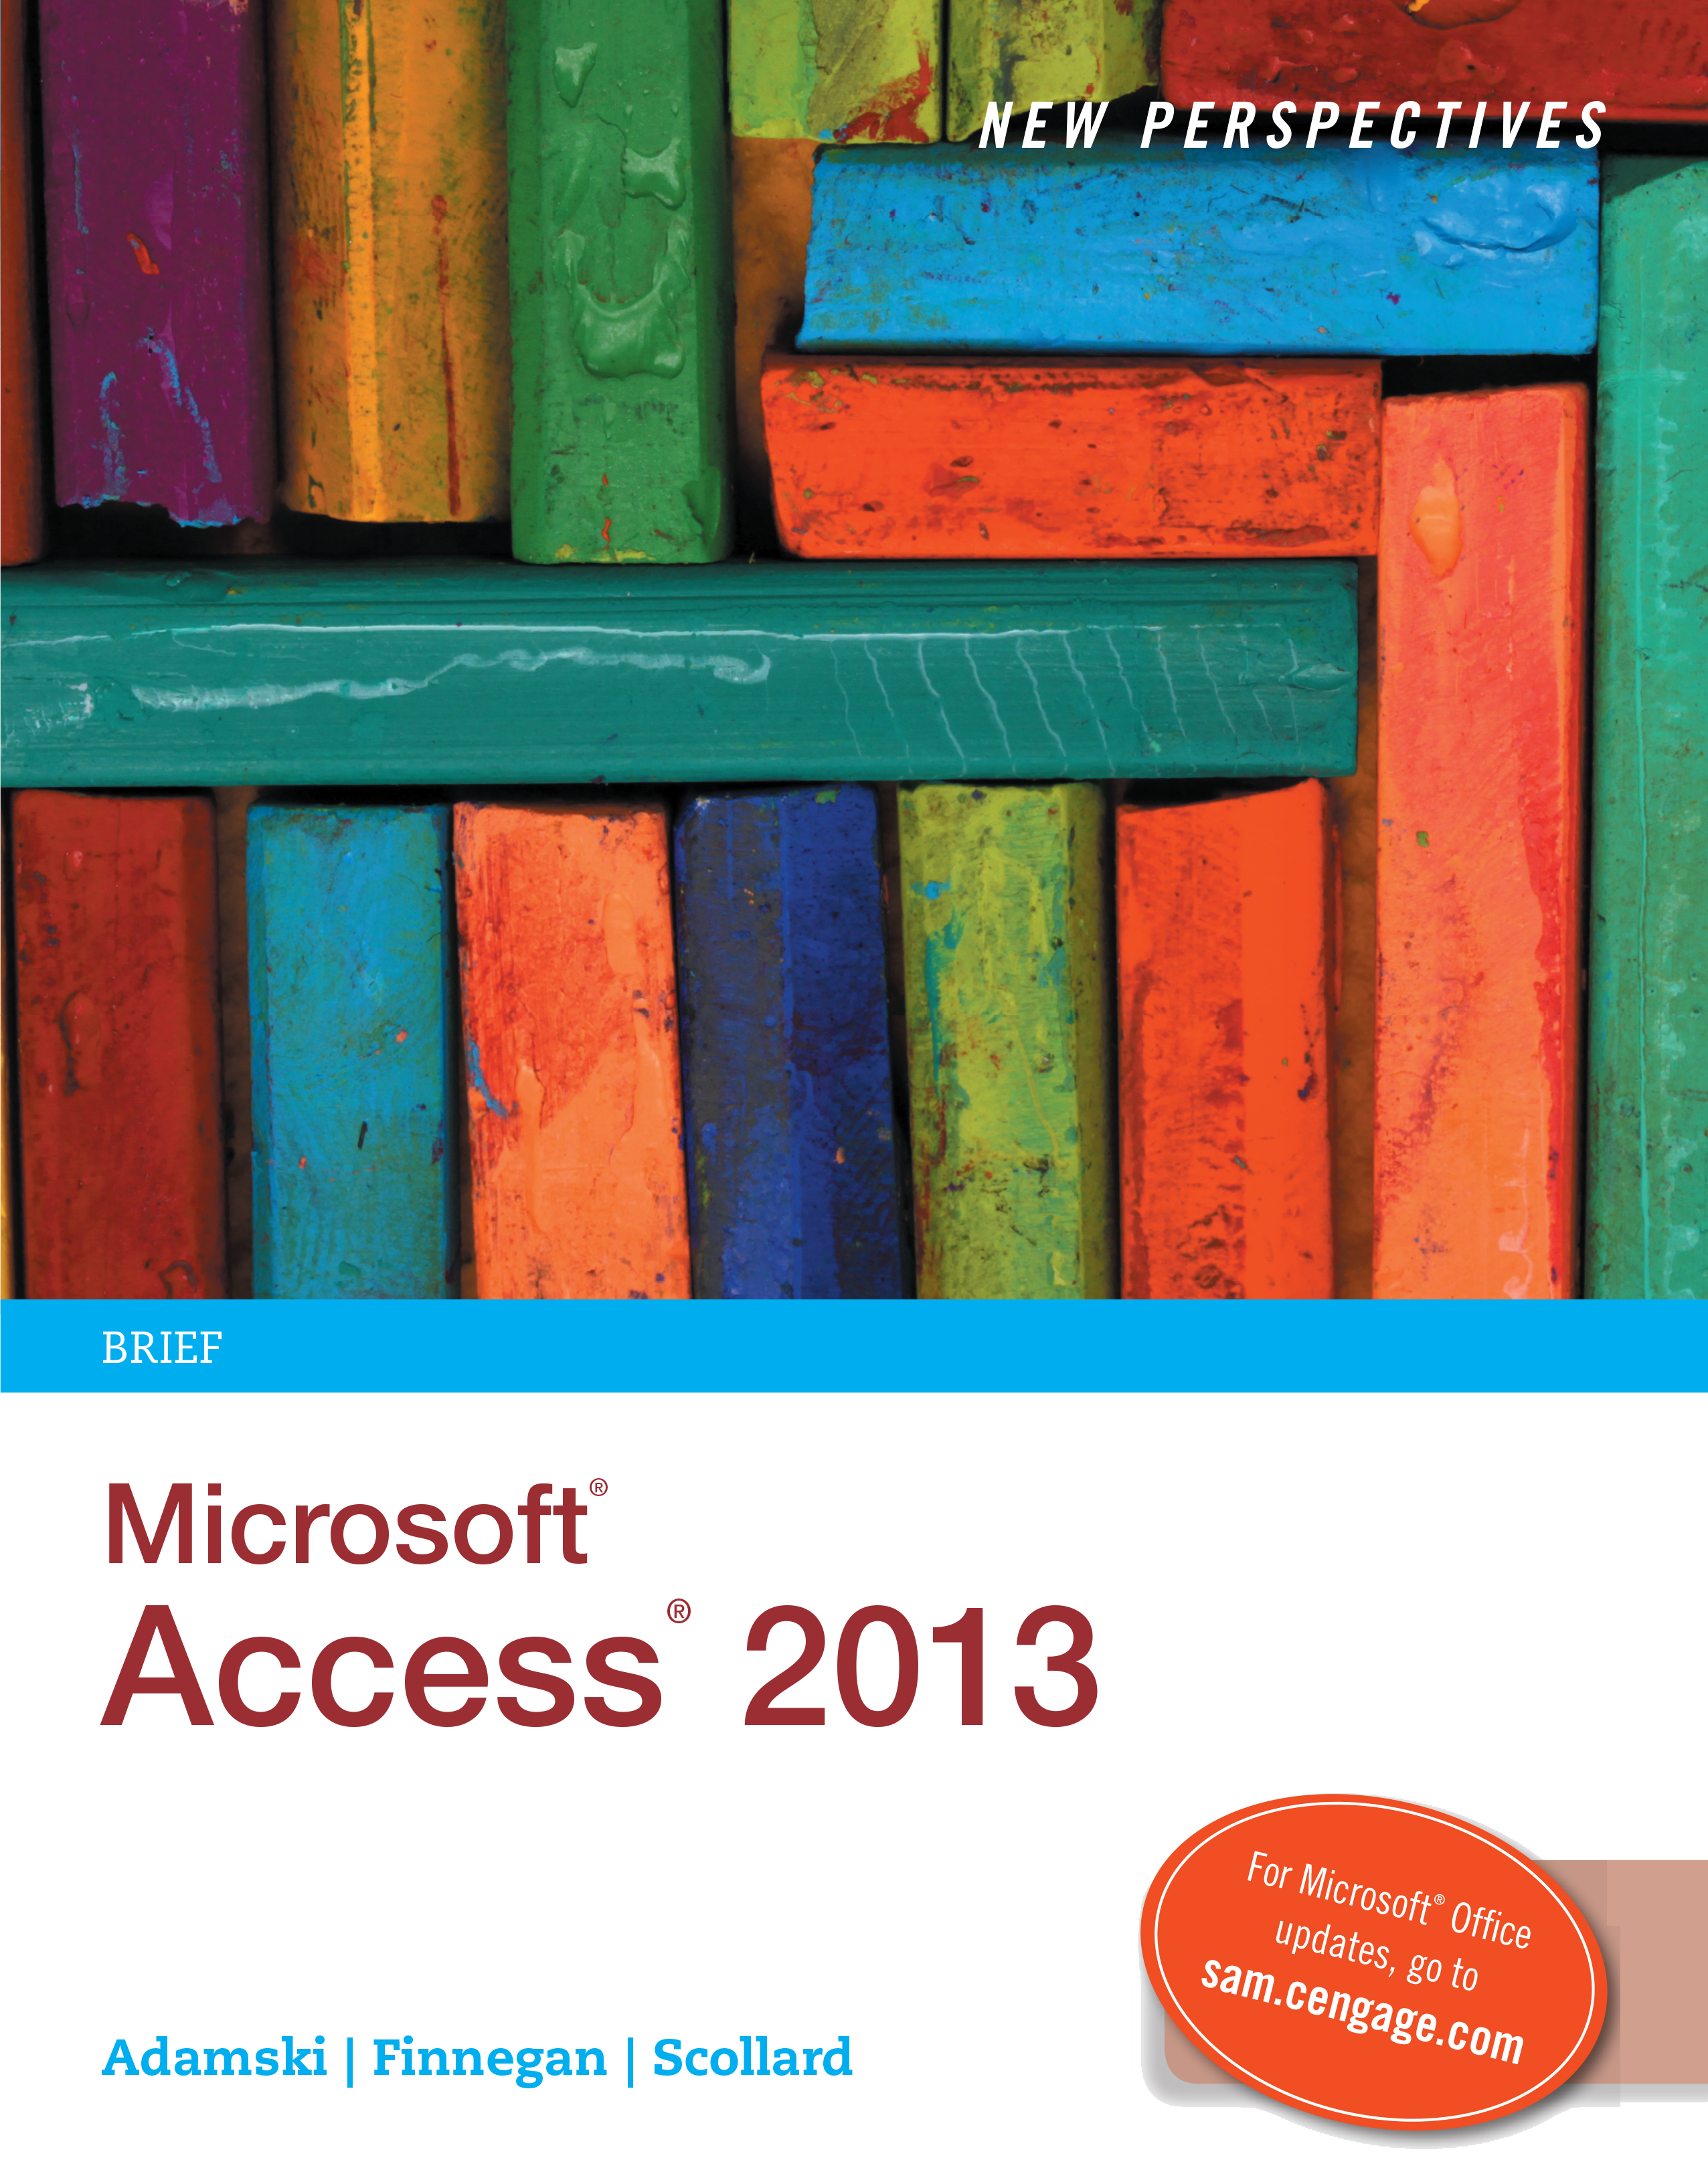 New Perspectives on Microsoft Access 2013, Brief